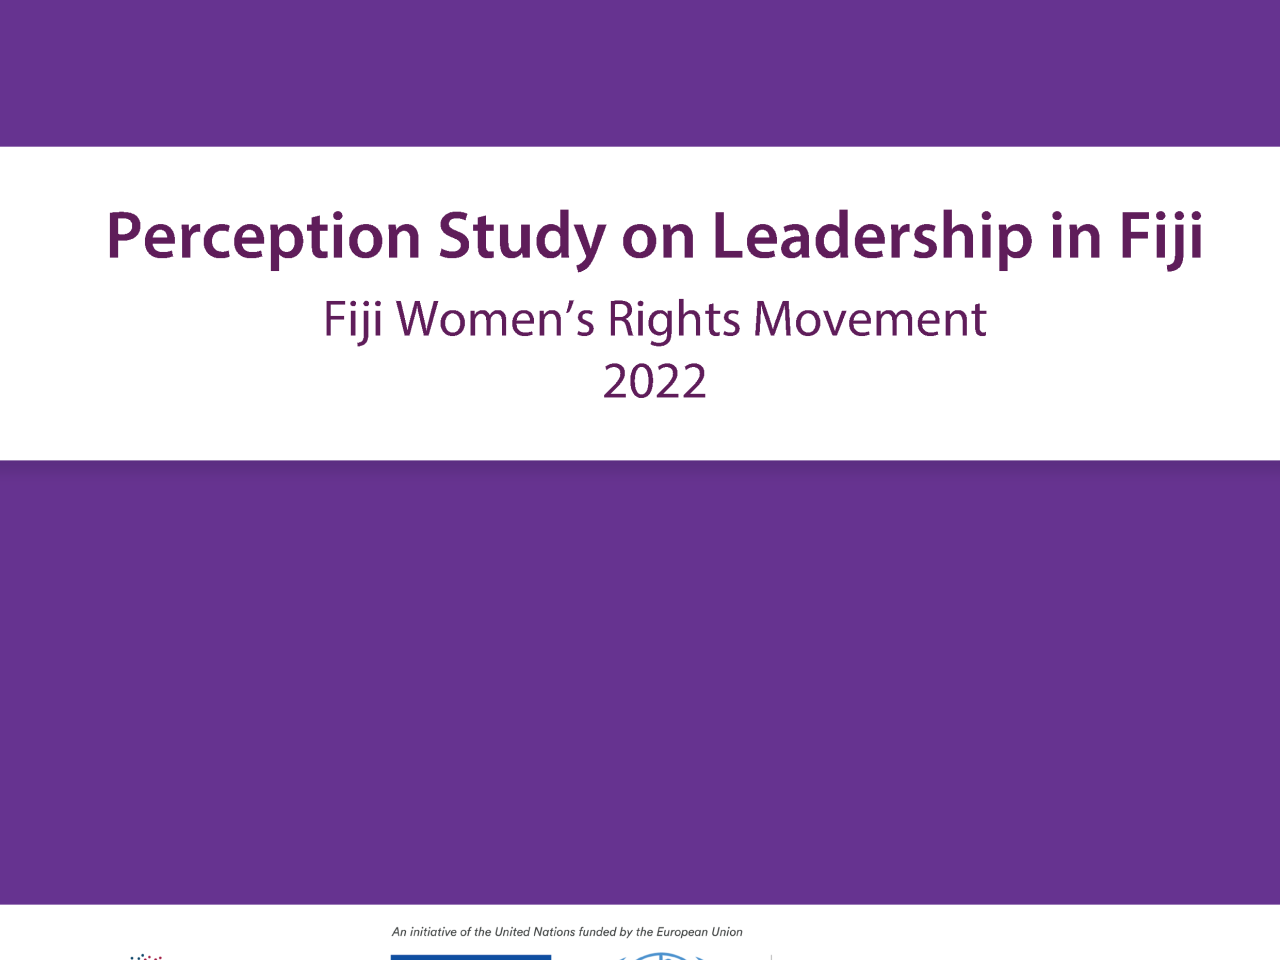 Cover of the publication with the logos of FWRM, UN Women and Spotlight Imitative